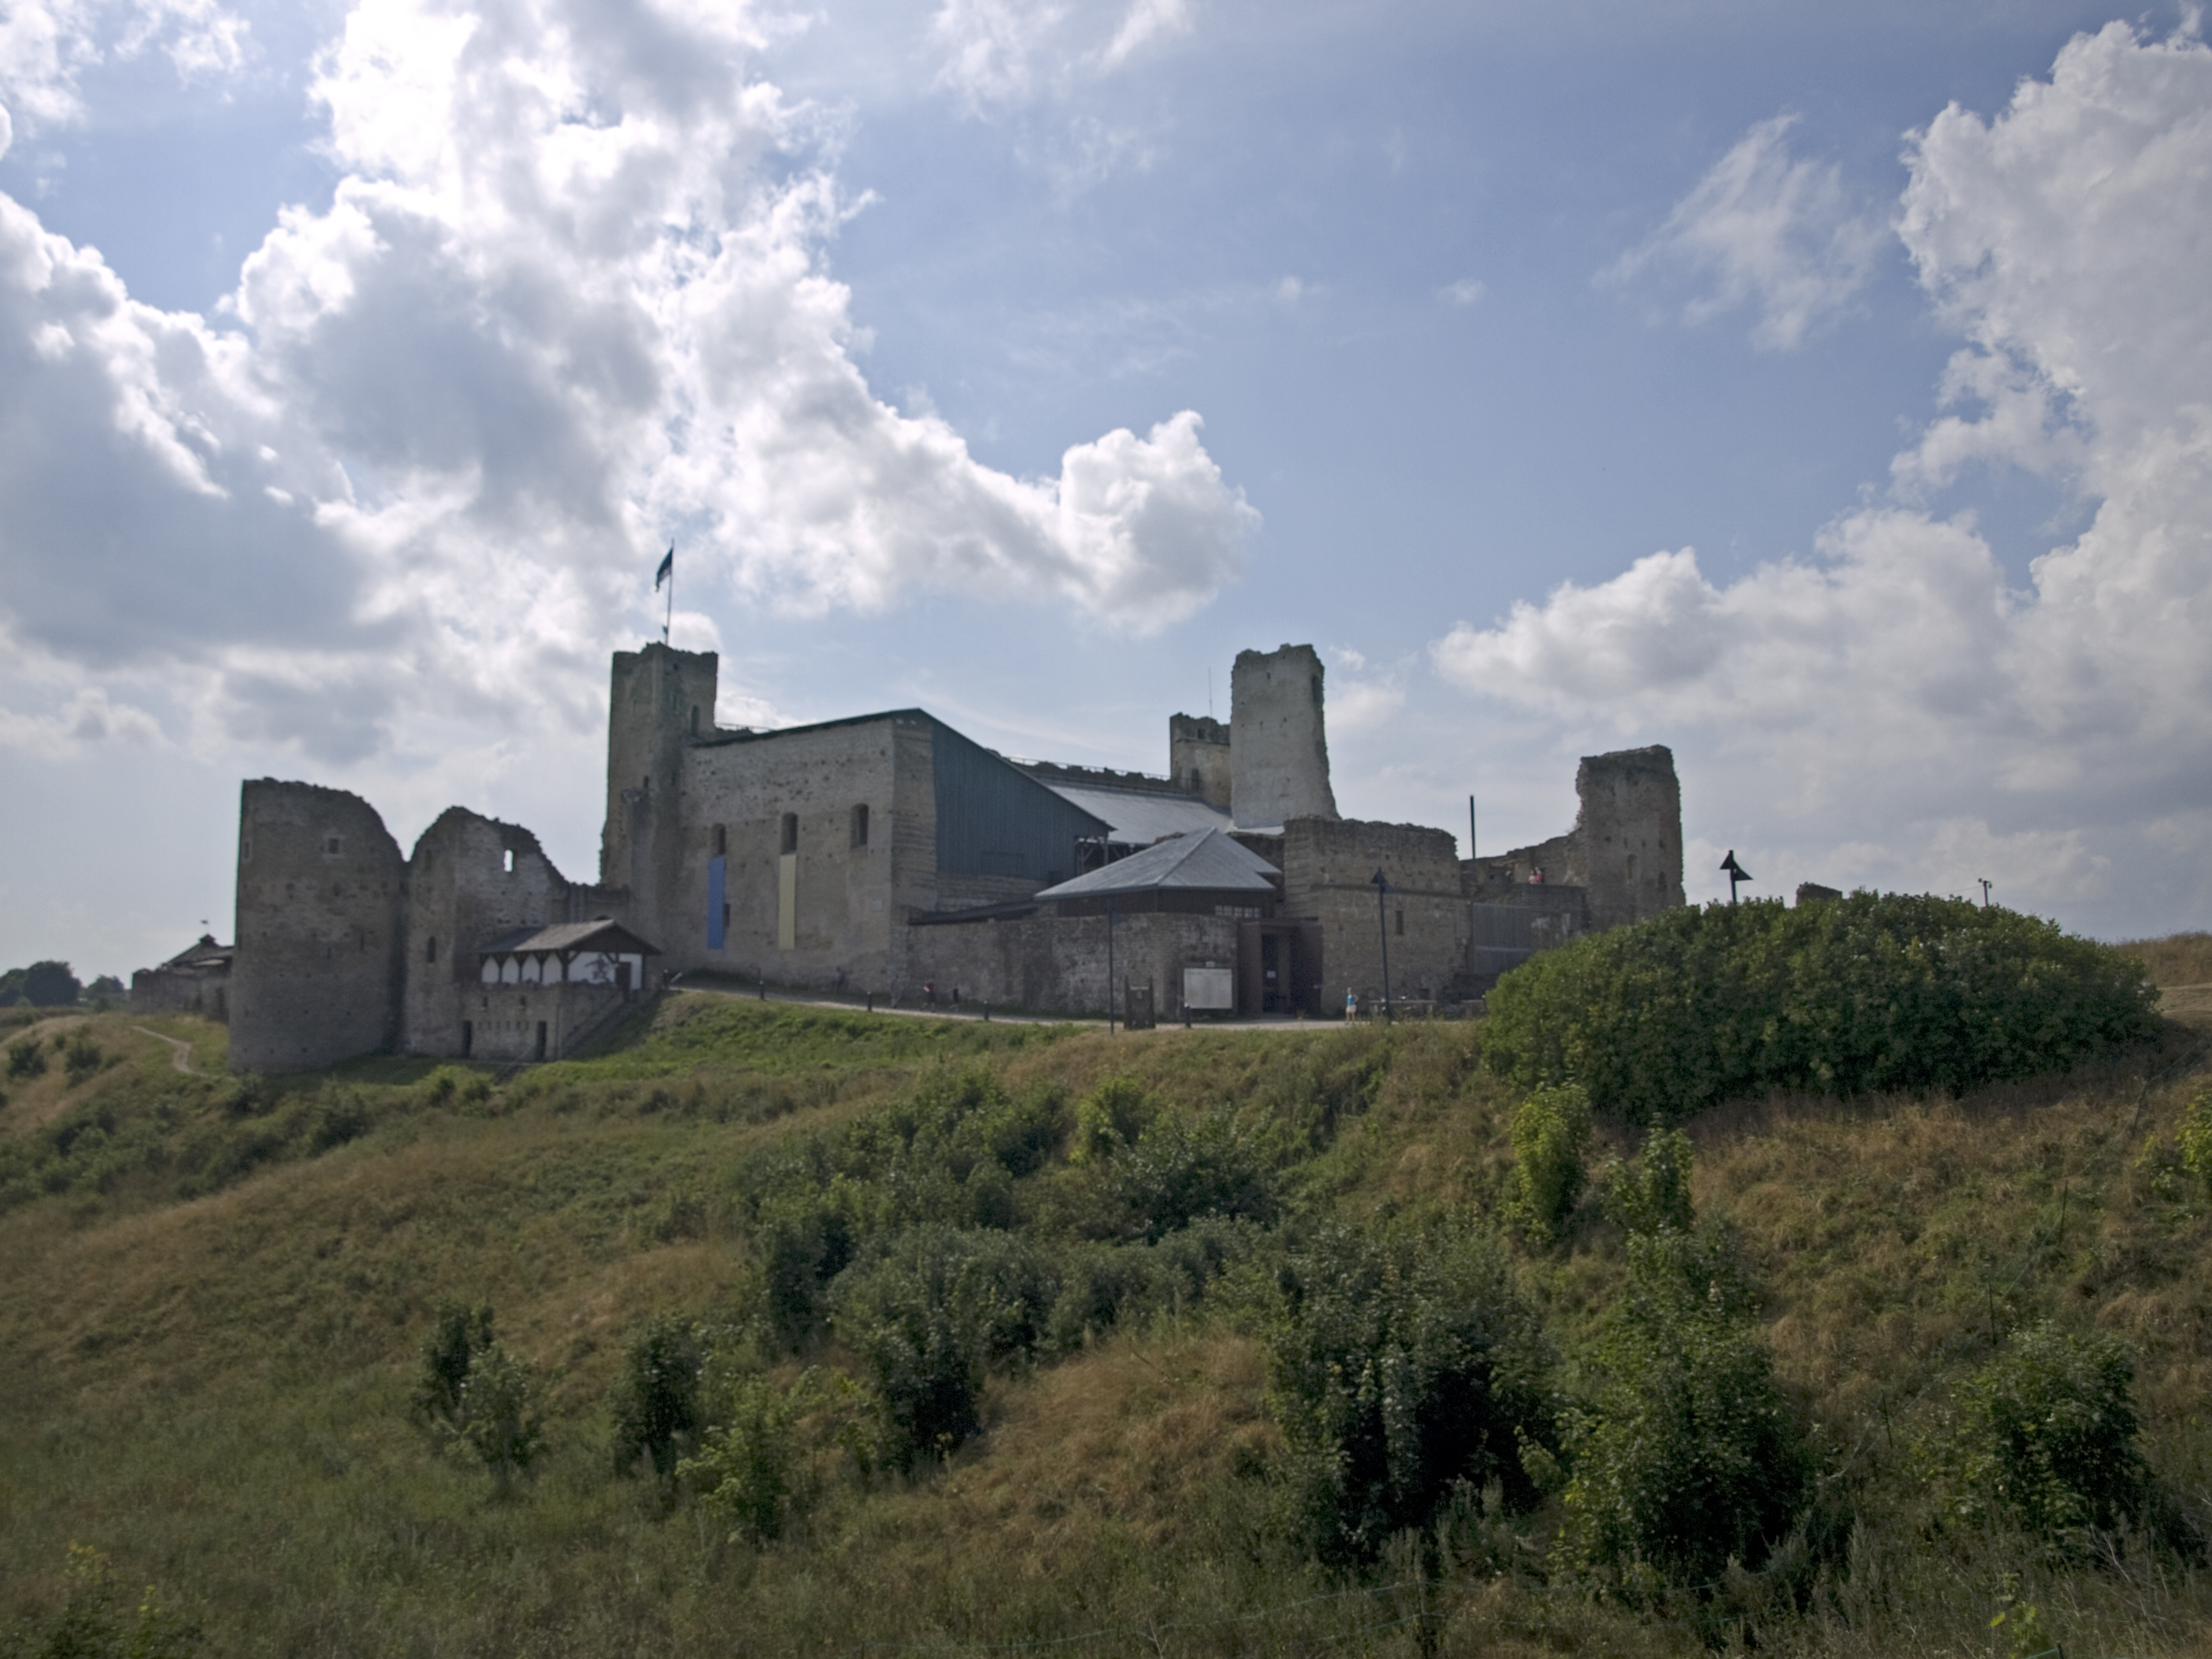 Rakvere Castle from the northeast